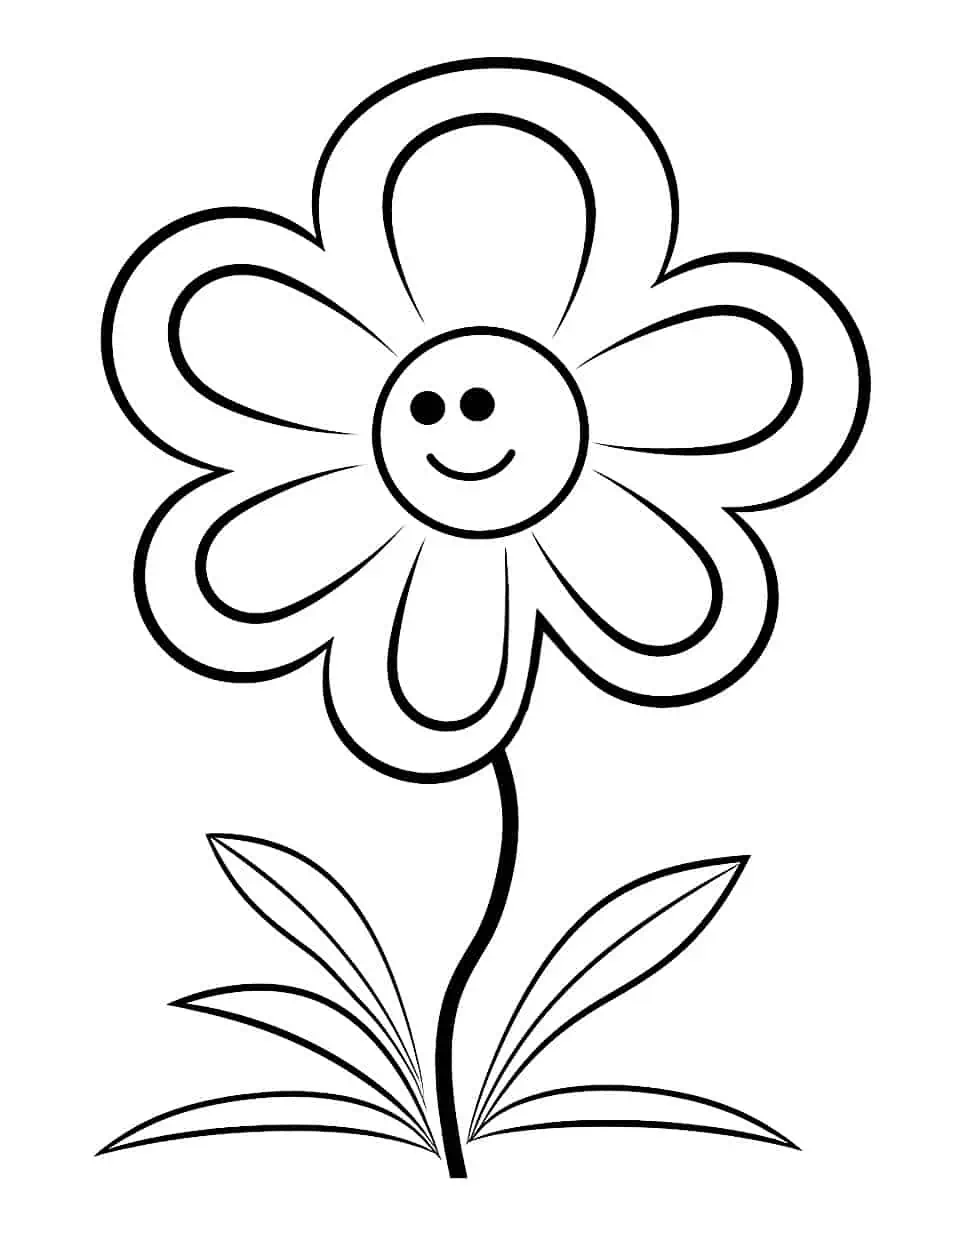 Easy Spring Flower for Toddlers Coloring Page - A coloring page featuring a large, easy-to-color flower, perfect for toddlers.